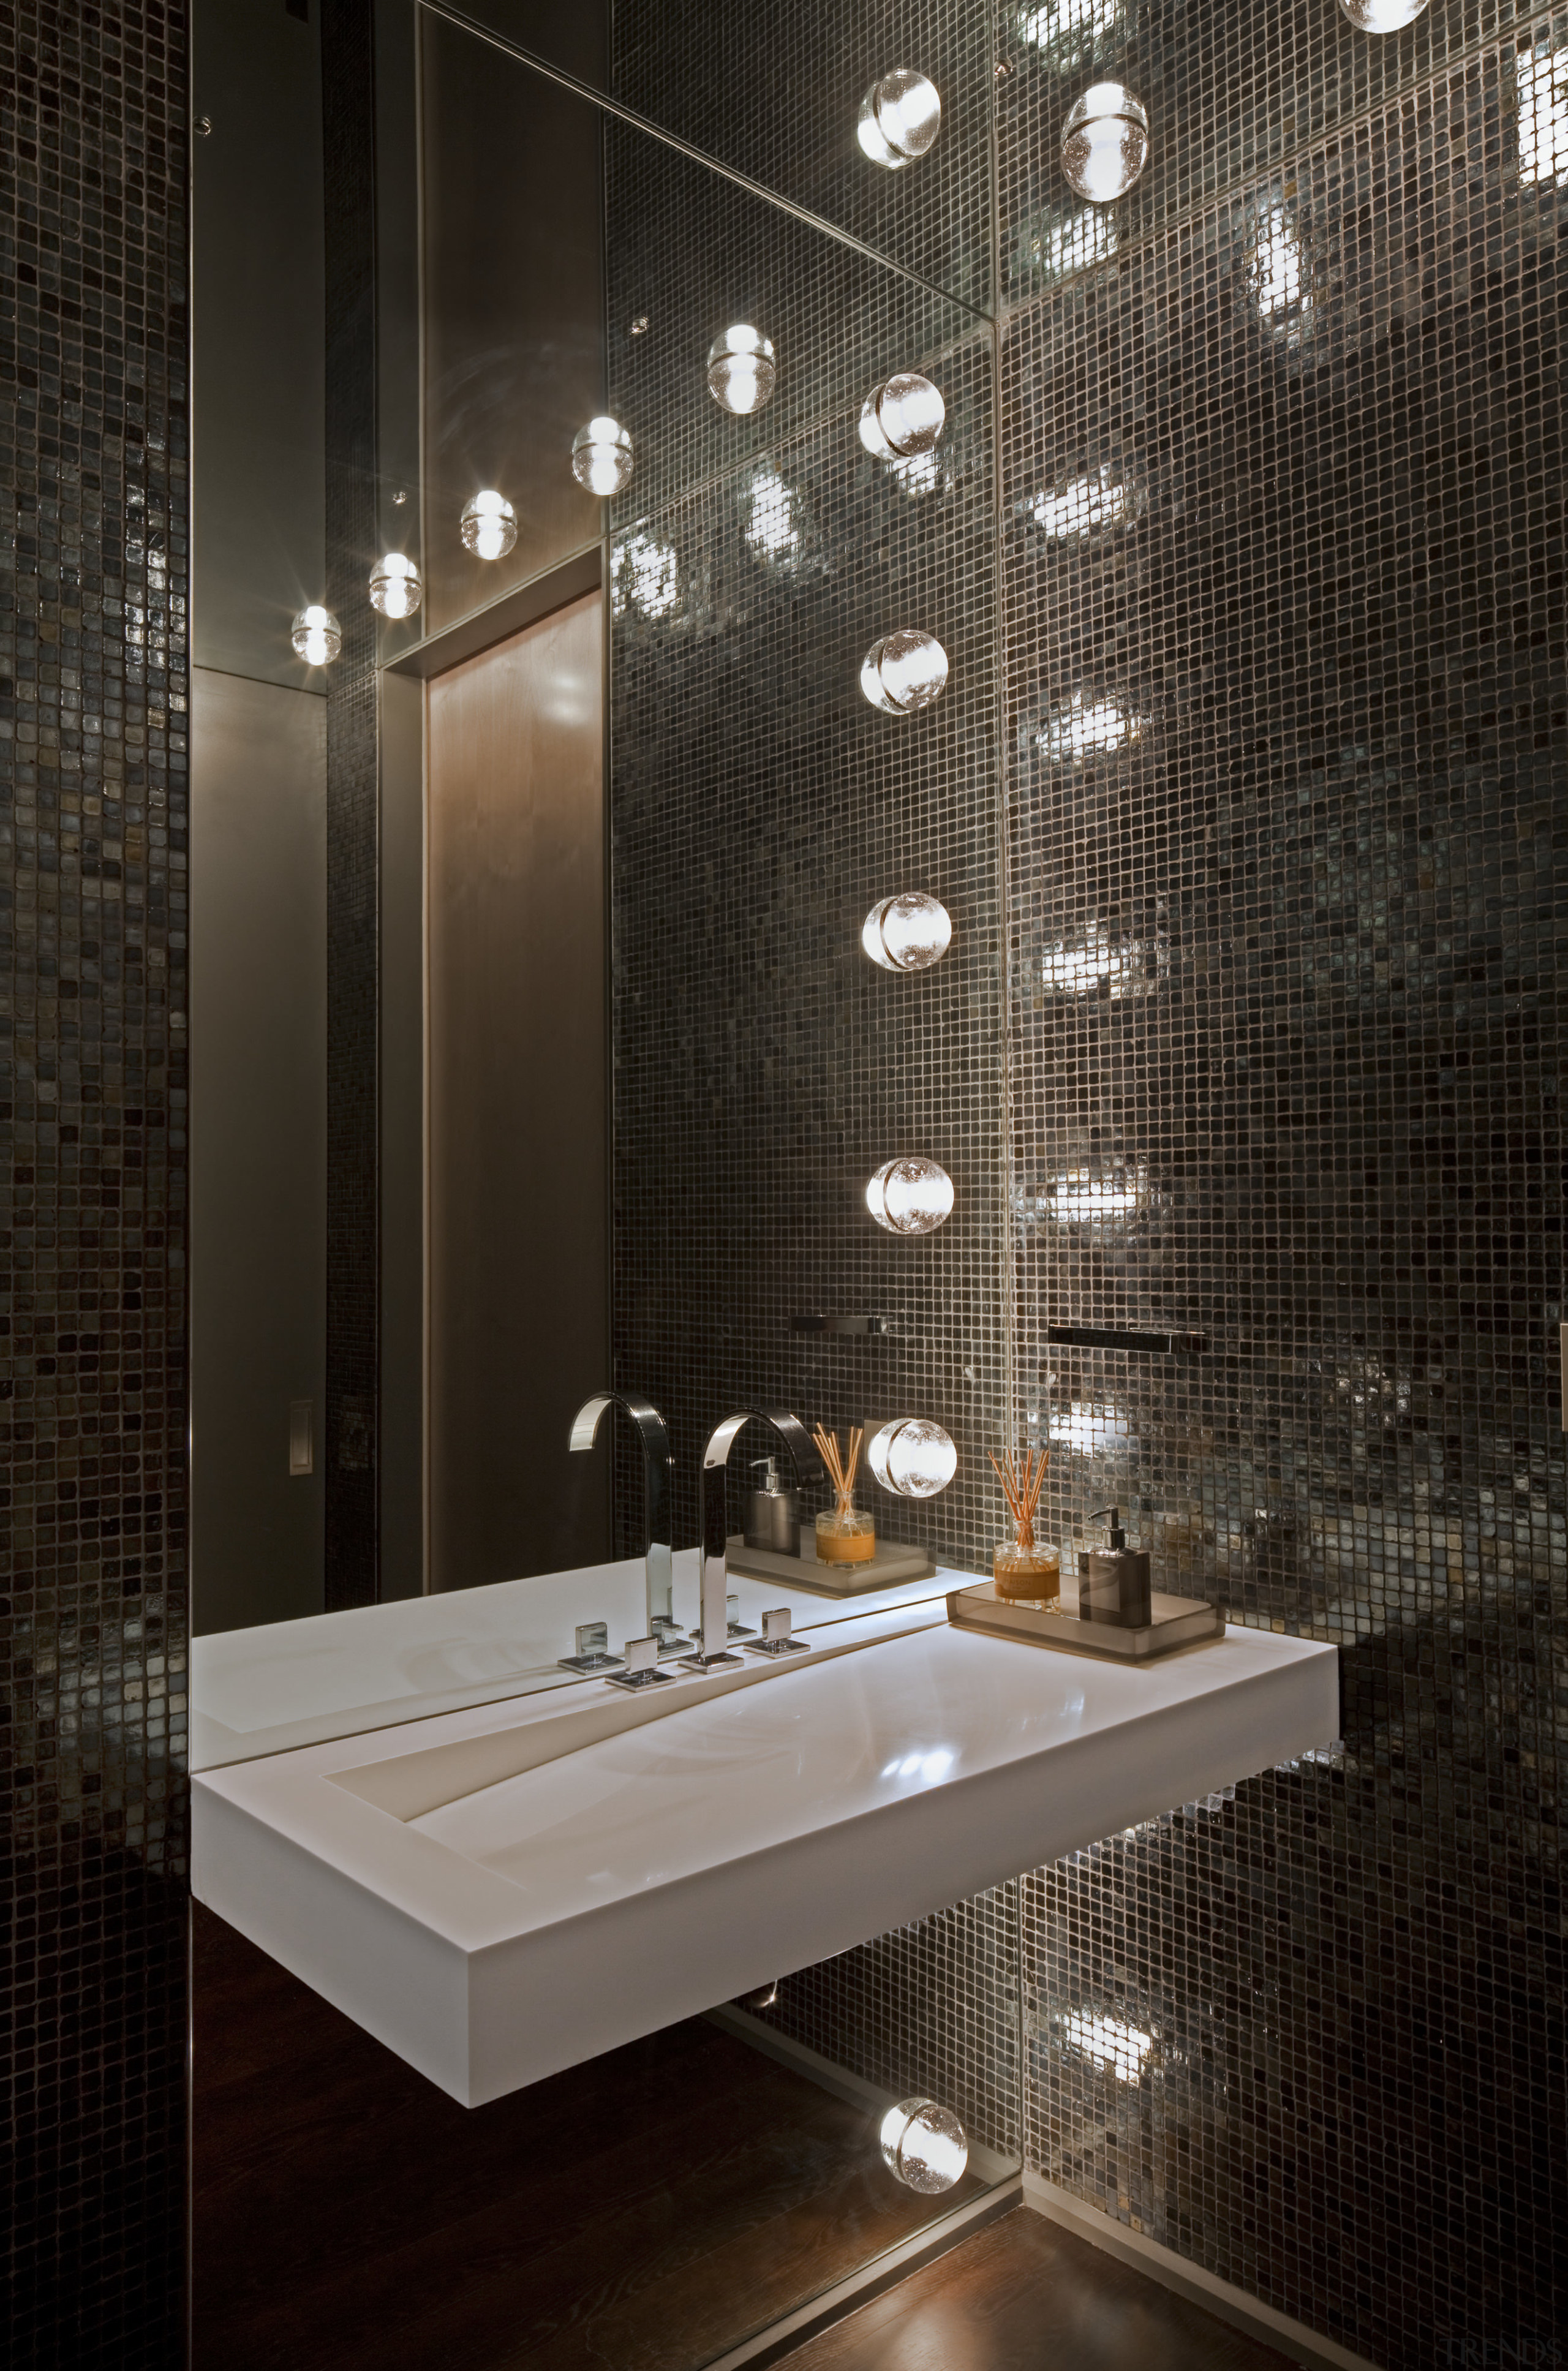 Hollywood lights in this powder room are a architecture, bathroom, ceiling, daylighting, flooring, interior design, light fixture, lighting, tile, wall, black